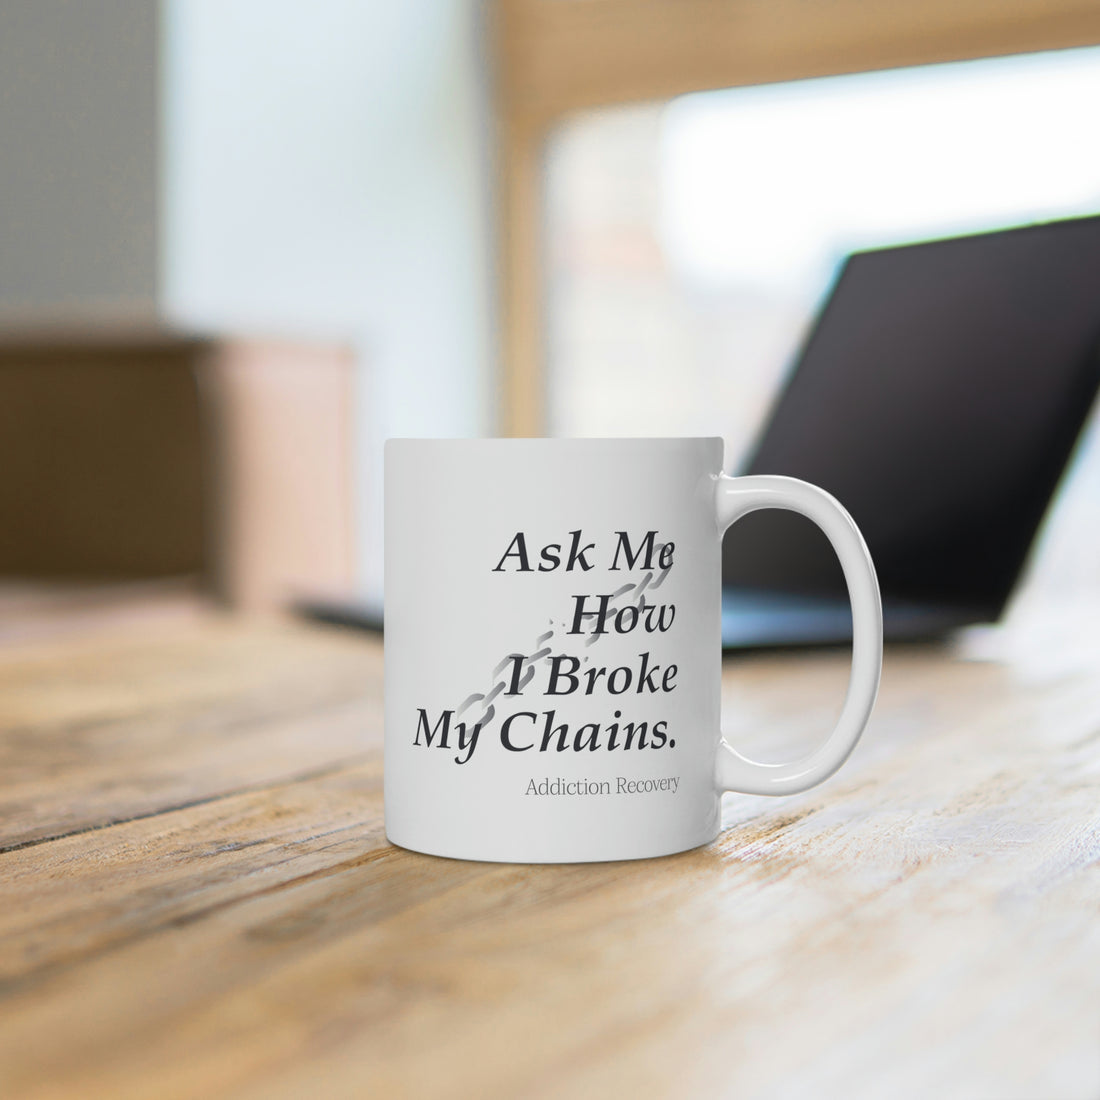 Ask Me How I Broke My Chains - White Ceramic Mug 2 sizes Available